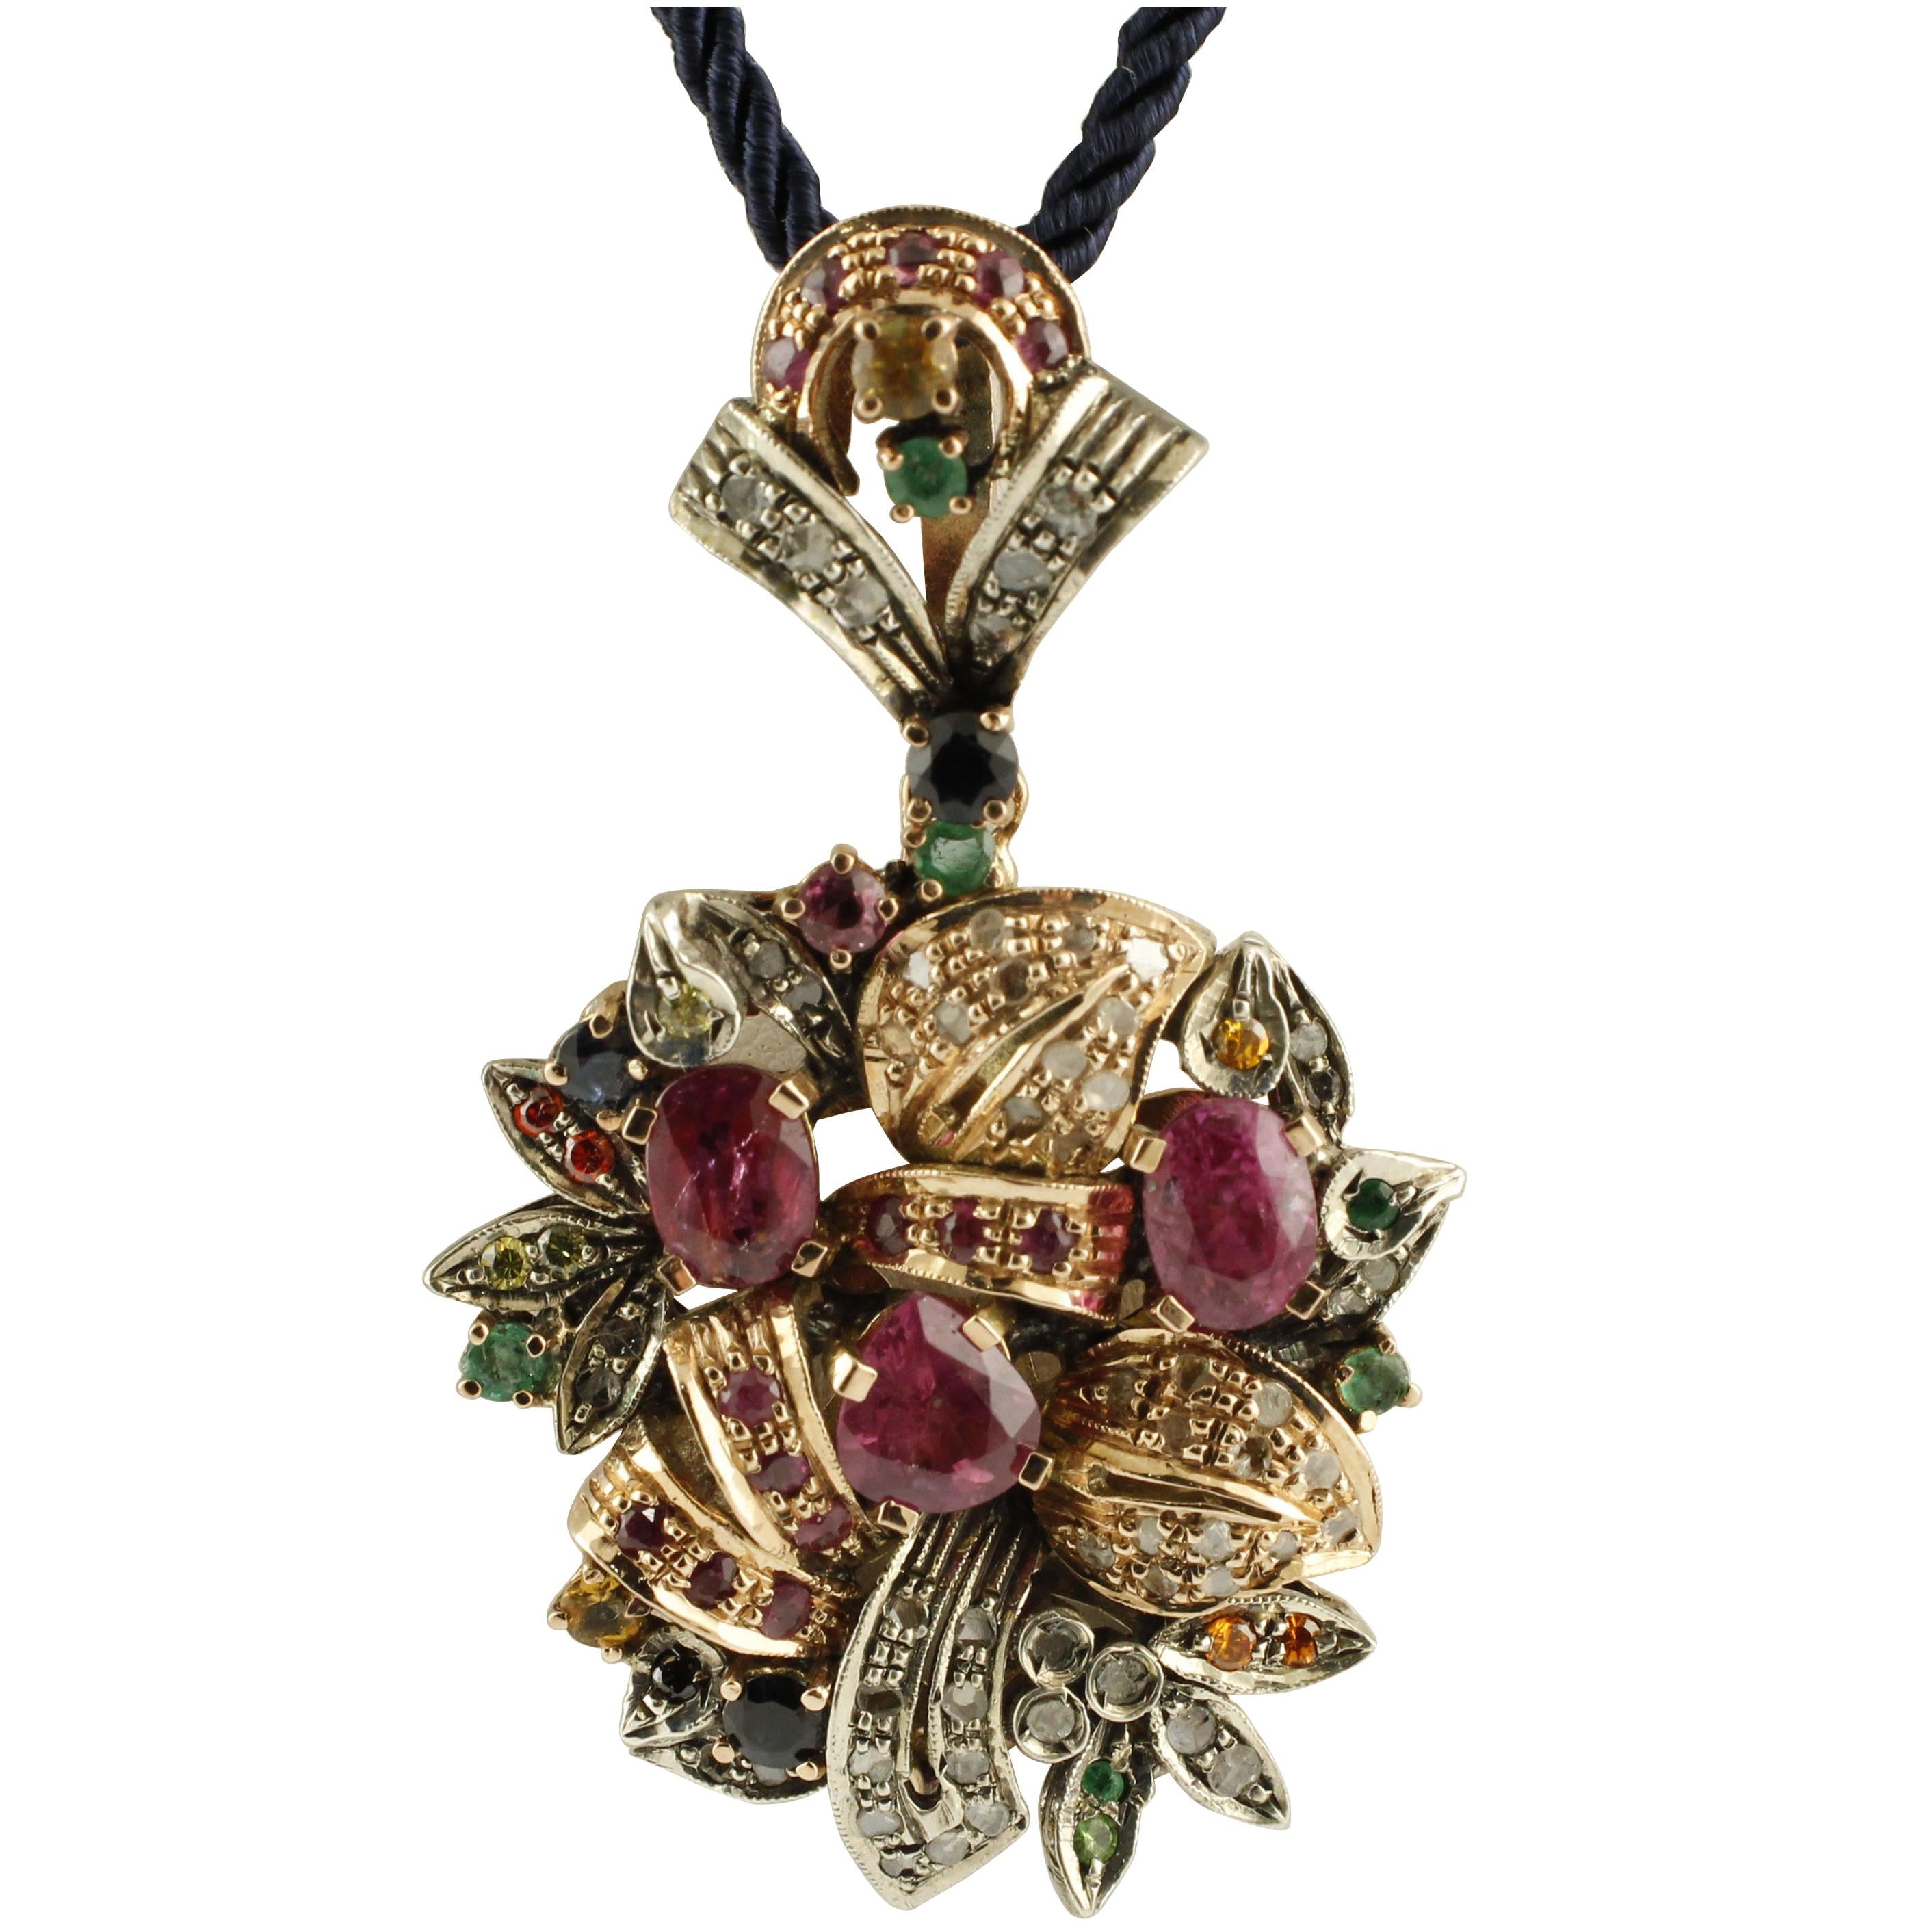  Multi Stones Rubies, Emeralds, Sapphires Rose Gold and Silver Pendant Necklace 